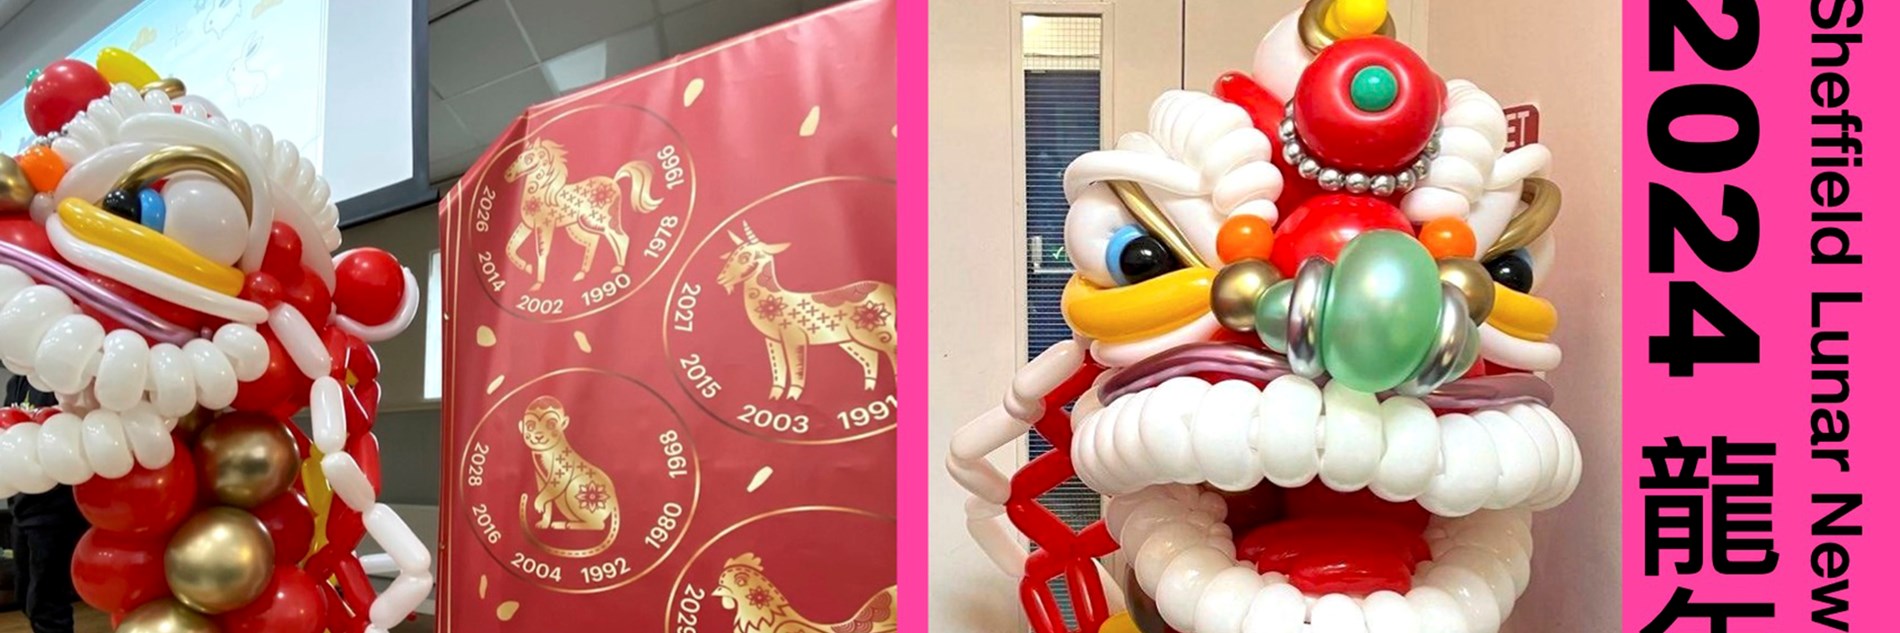 Composite image of 2 photographs of a large colorful balloon sculpture of a dragon, with a bright pink banner down the right hand side which reads Sheffield Lunar New Year Celebration 2024